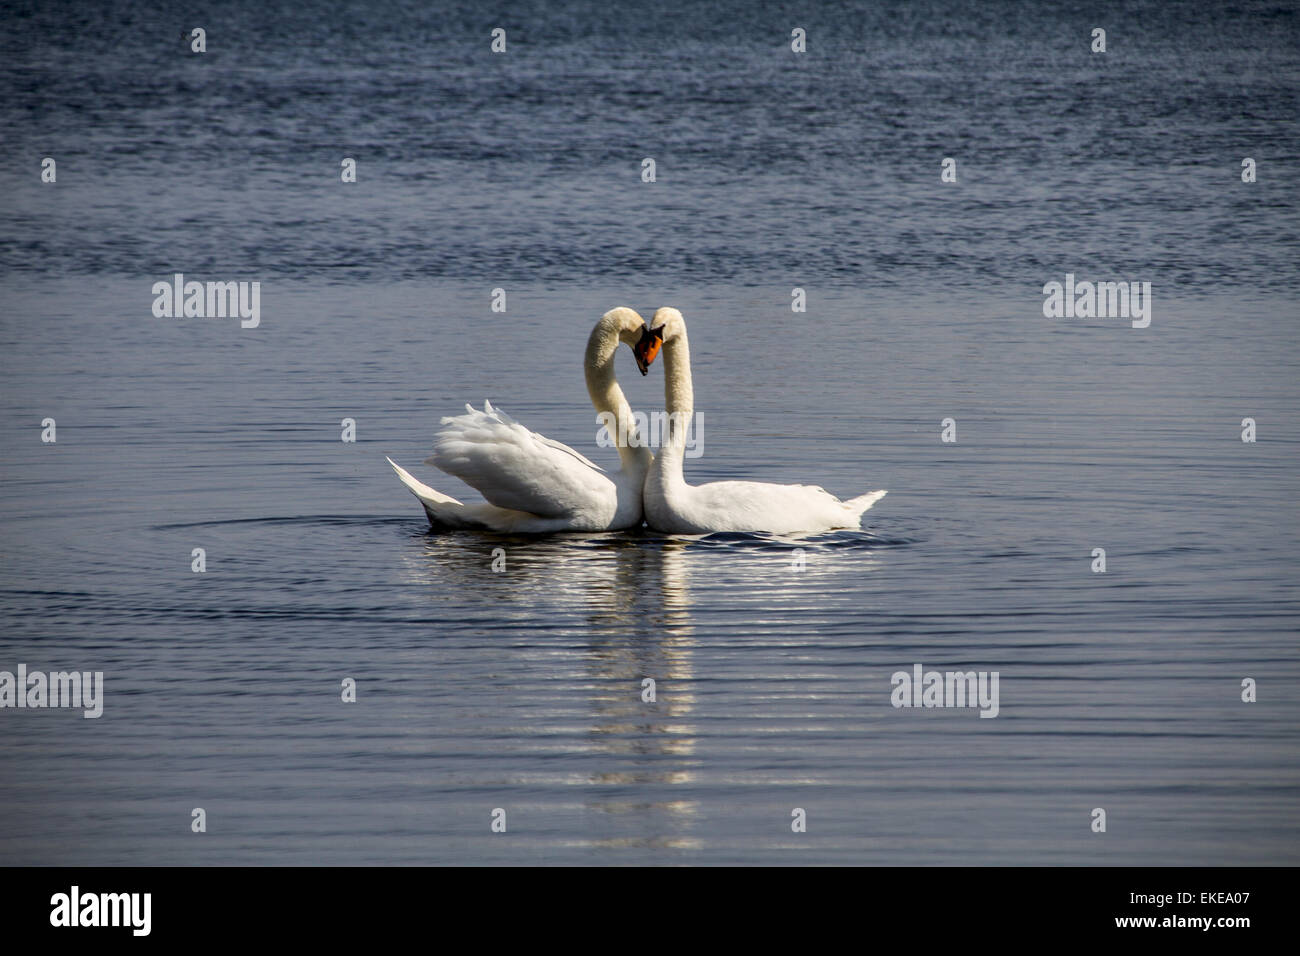 Mating Mute Swans on the Clatto Park pond in Dundee, UK Stock Photo